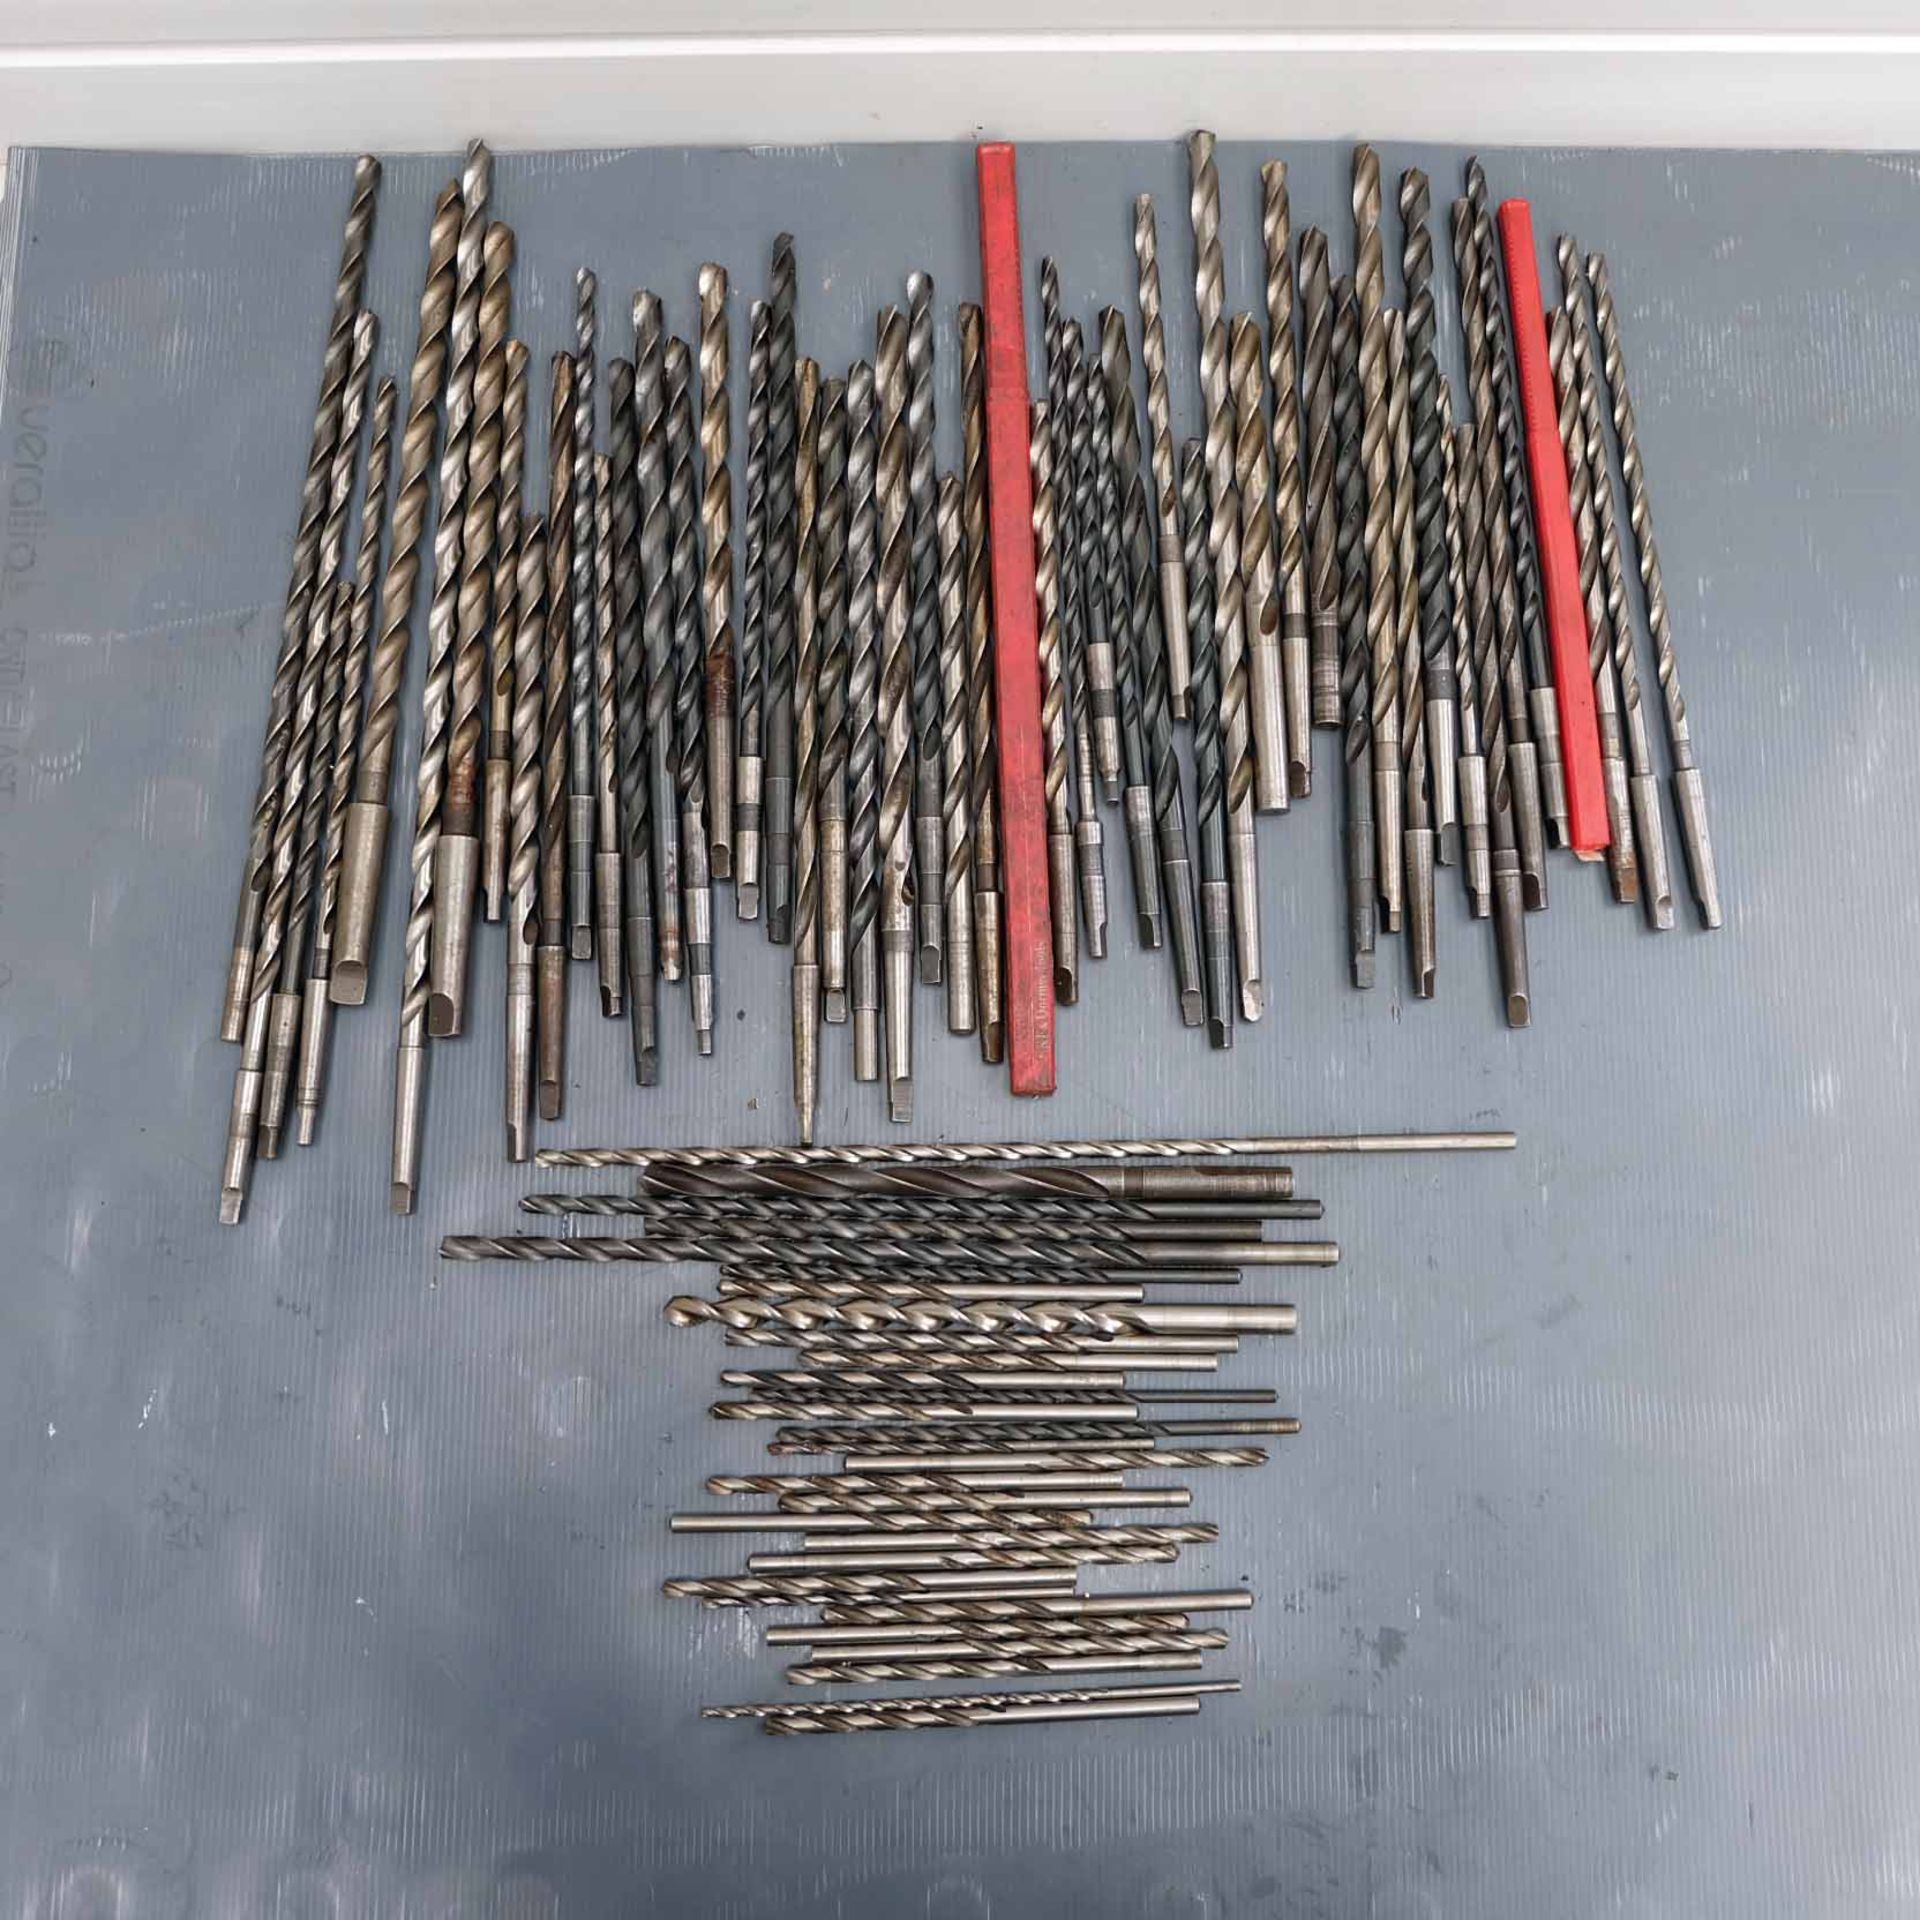 Quantity of Long Series Twist Drills. Various Imperial Sizes. 1 & 2 Morse Taper Straight Shank.